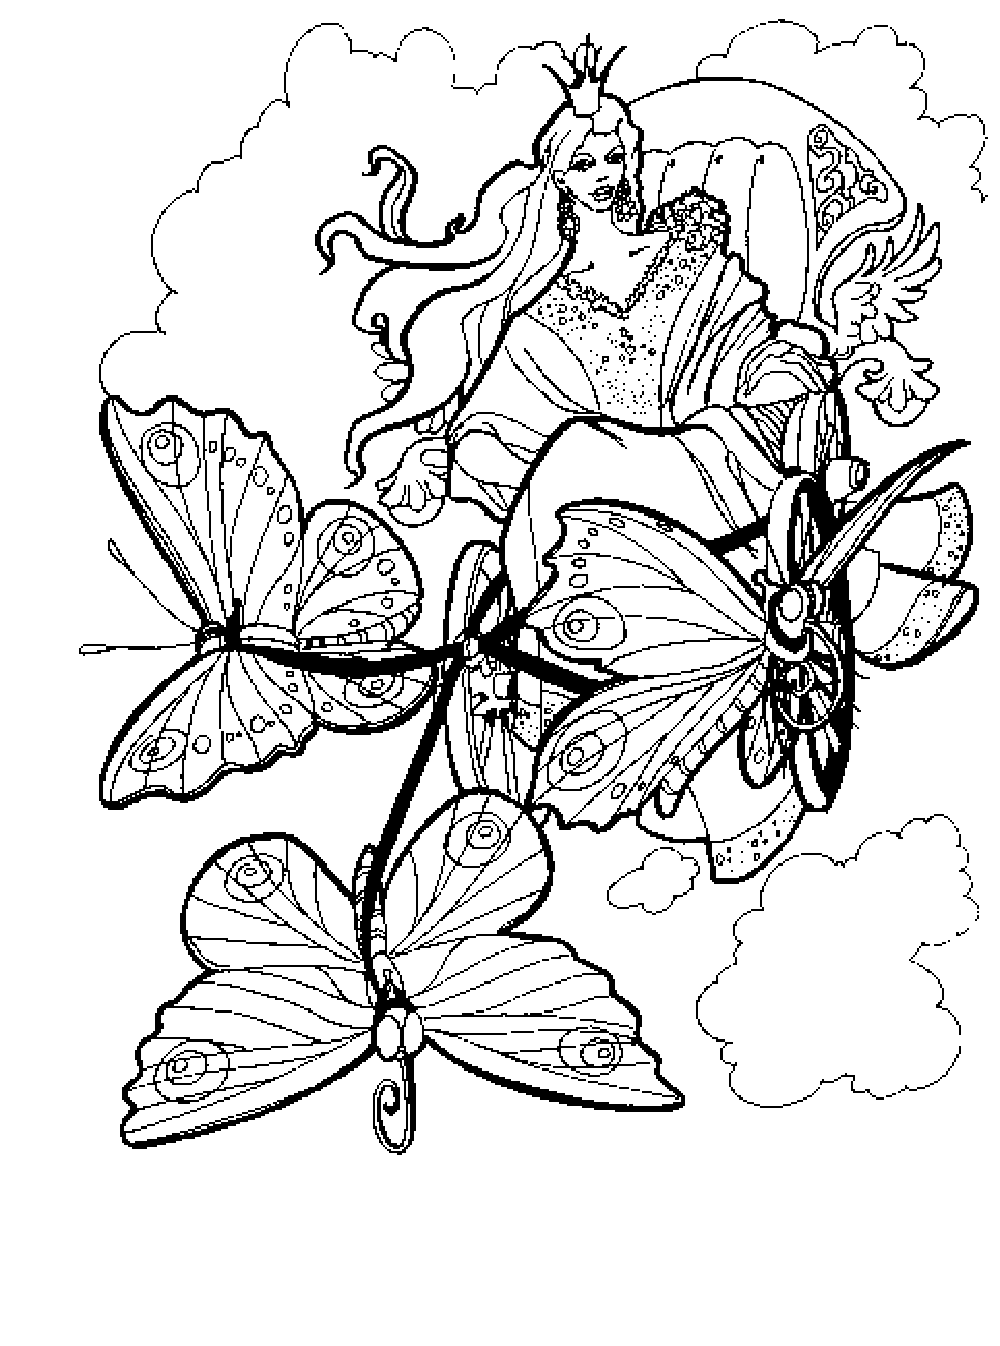 Free Printable Advanced Coloring Pages - Coloring Home